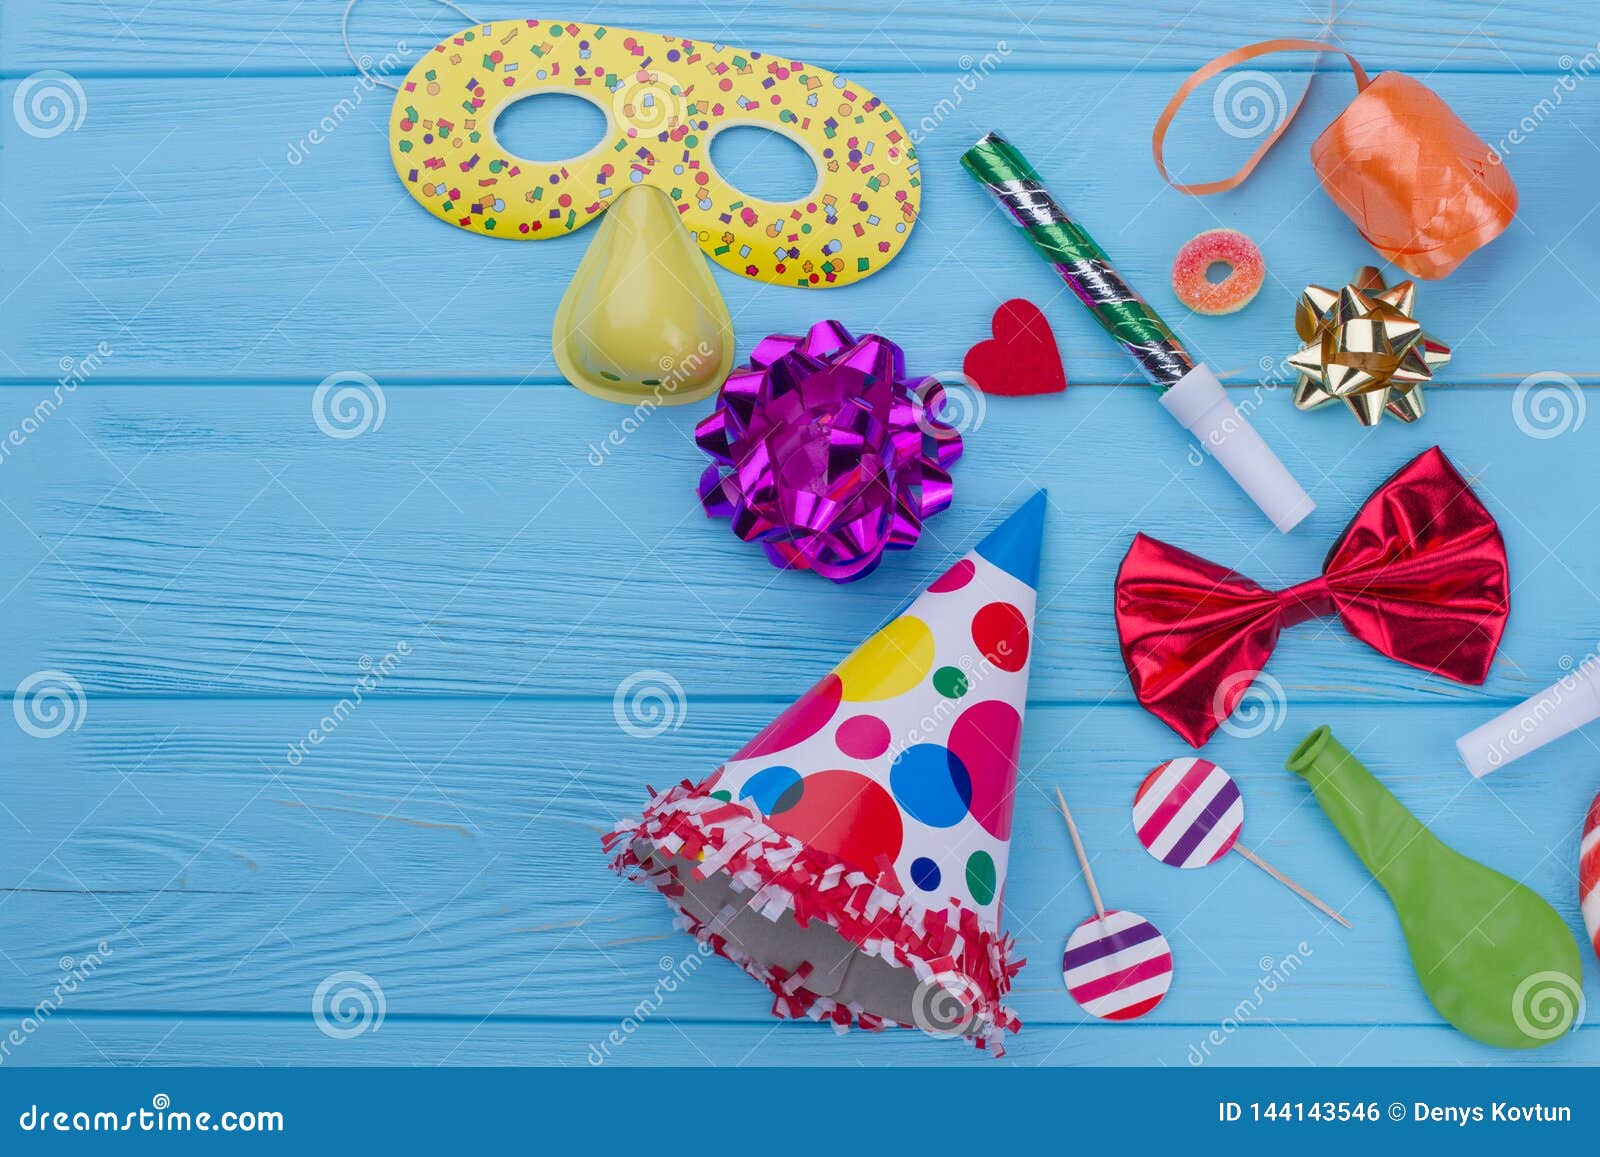 Colorful Birthday Decorations on Wooden Background. Stock Photo - Image of  childhood, clown: 144143546